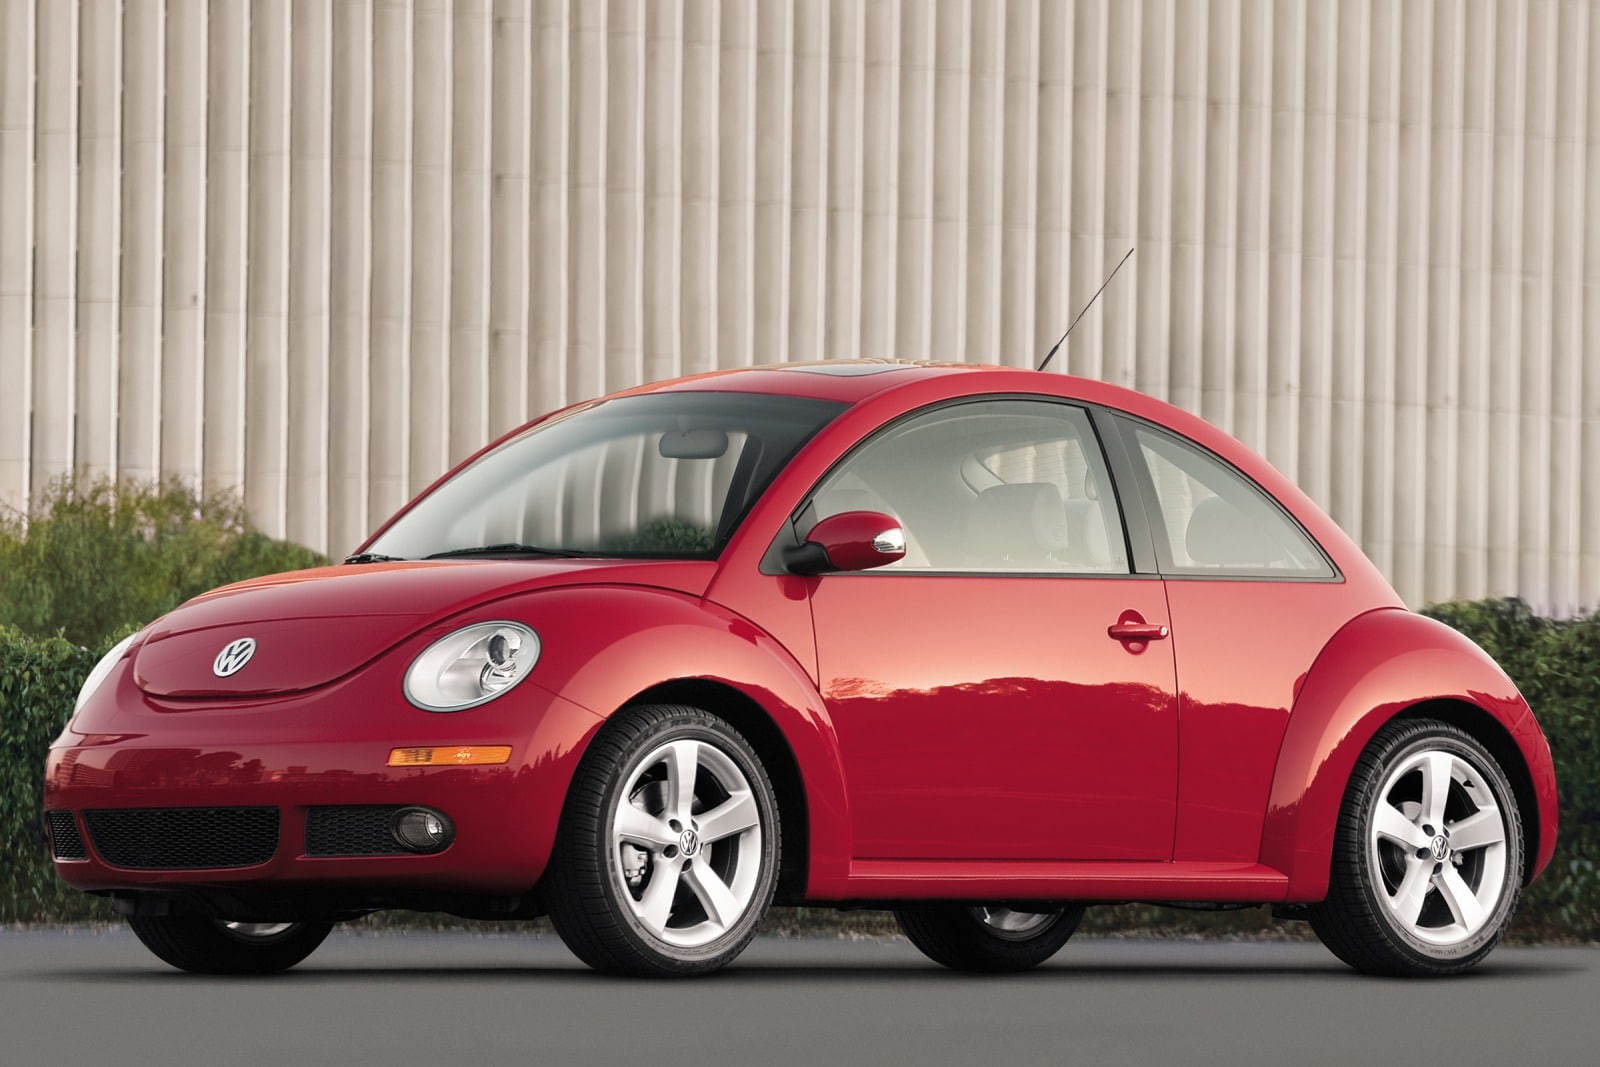 Are Volkswagen Beetles a good car?